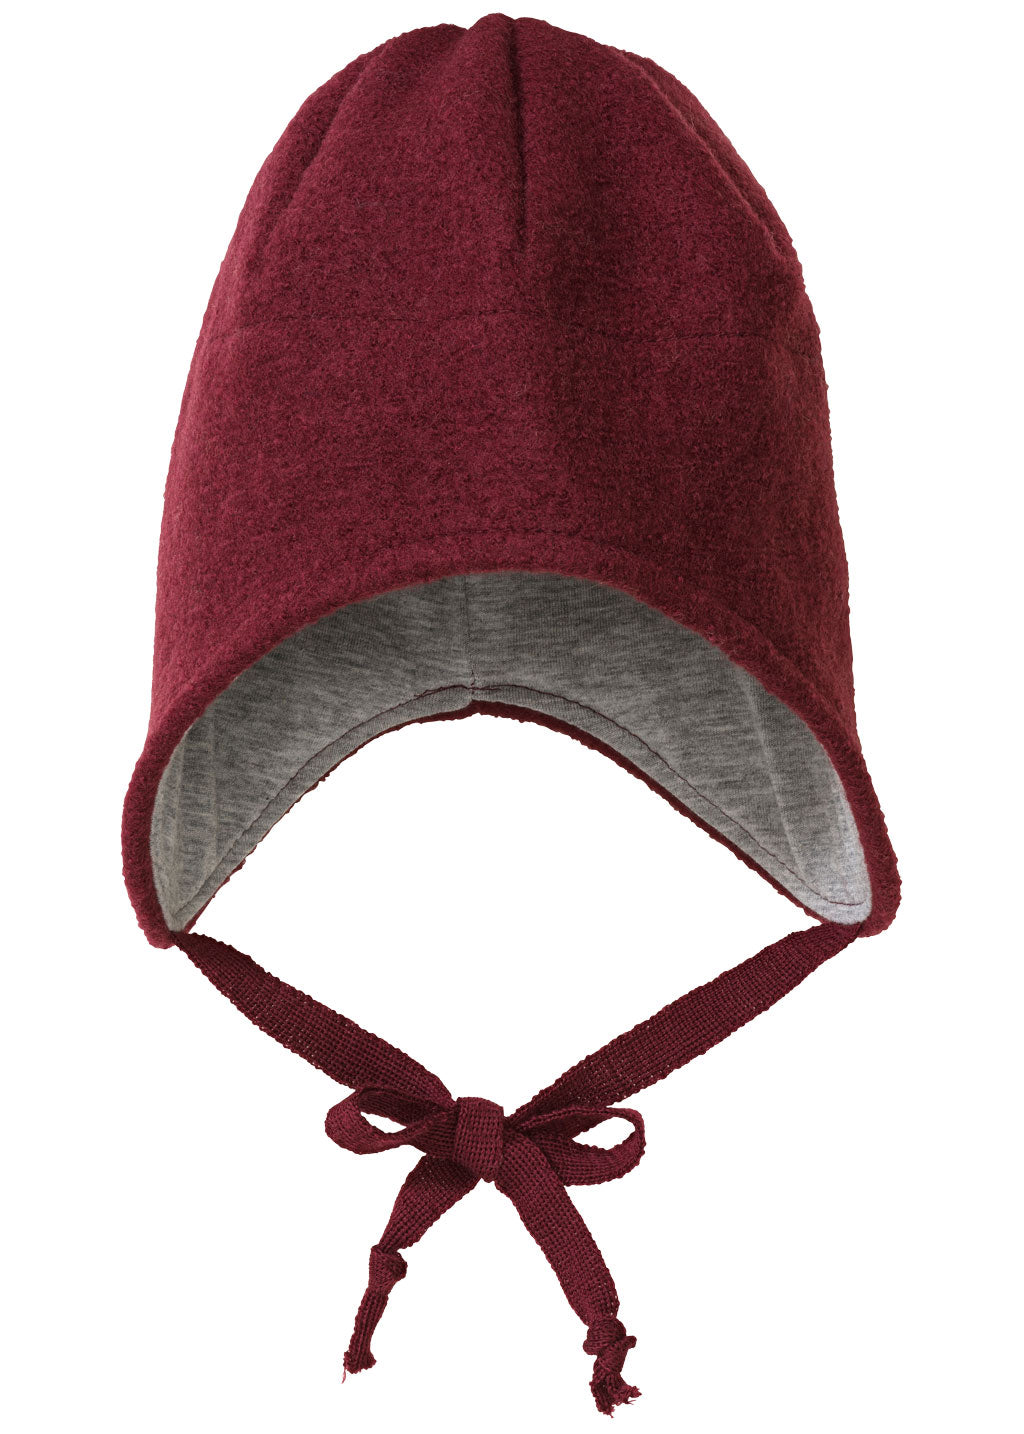 Disana boiled wool hat in cassis